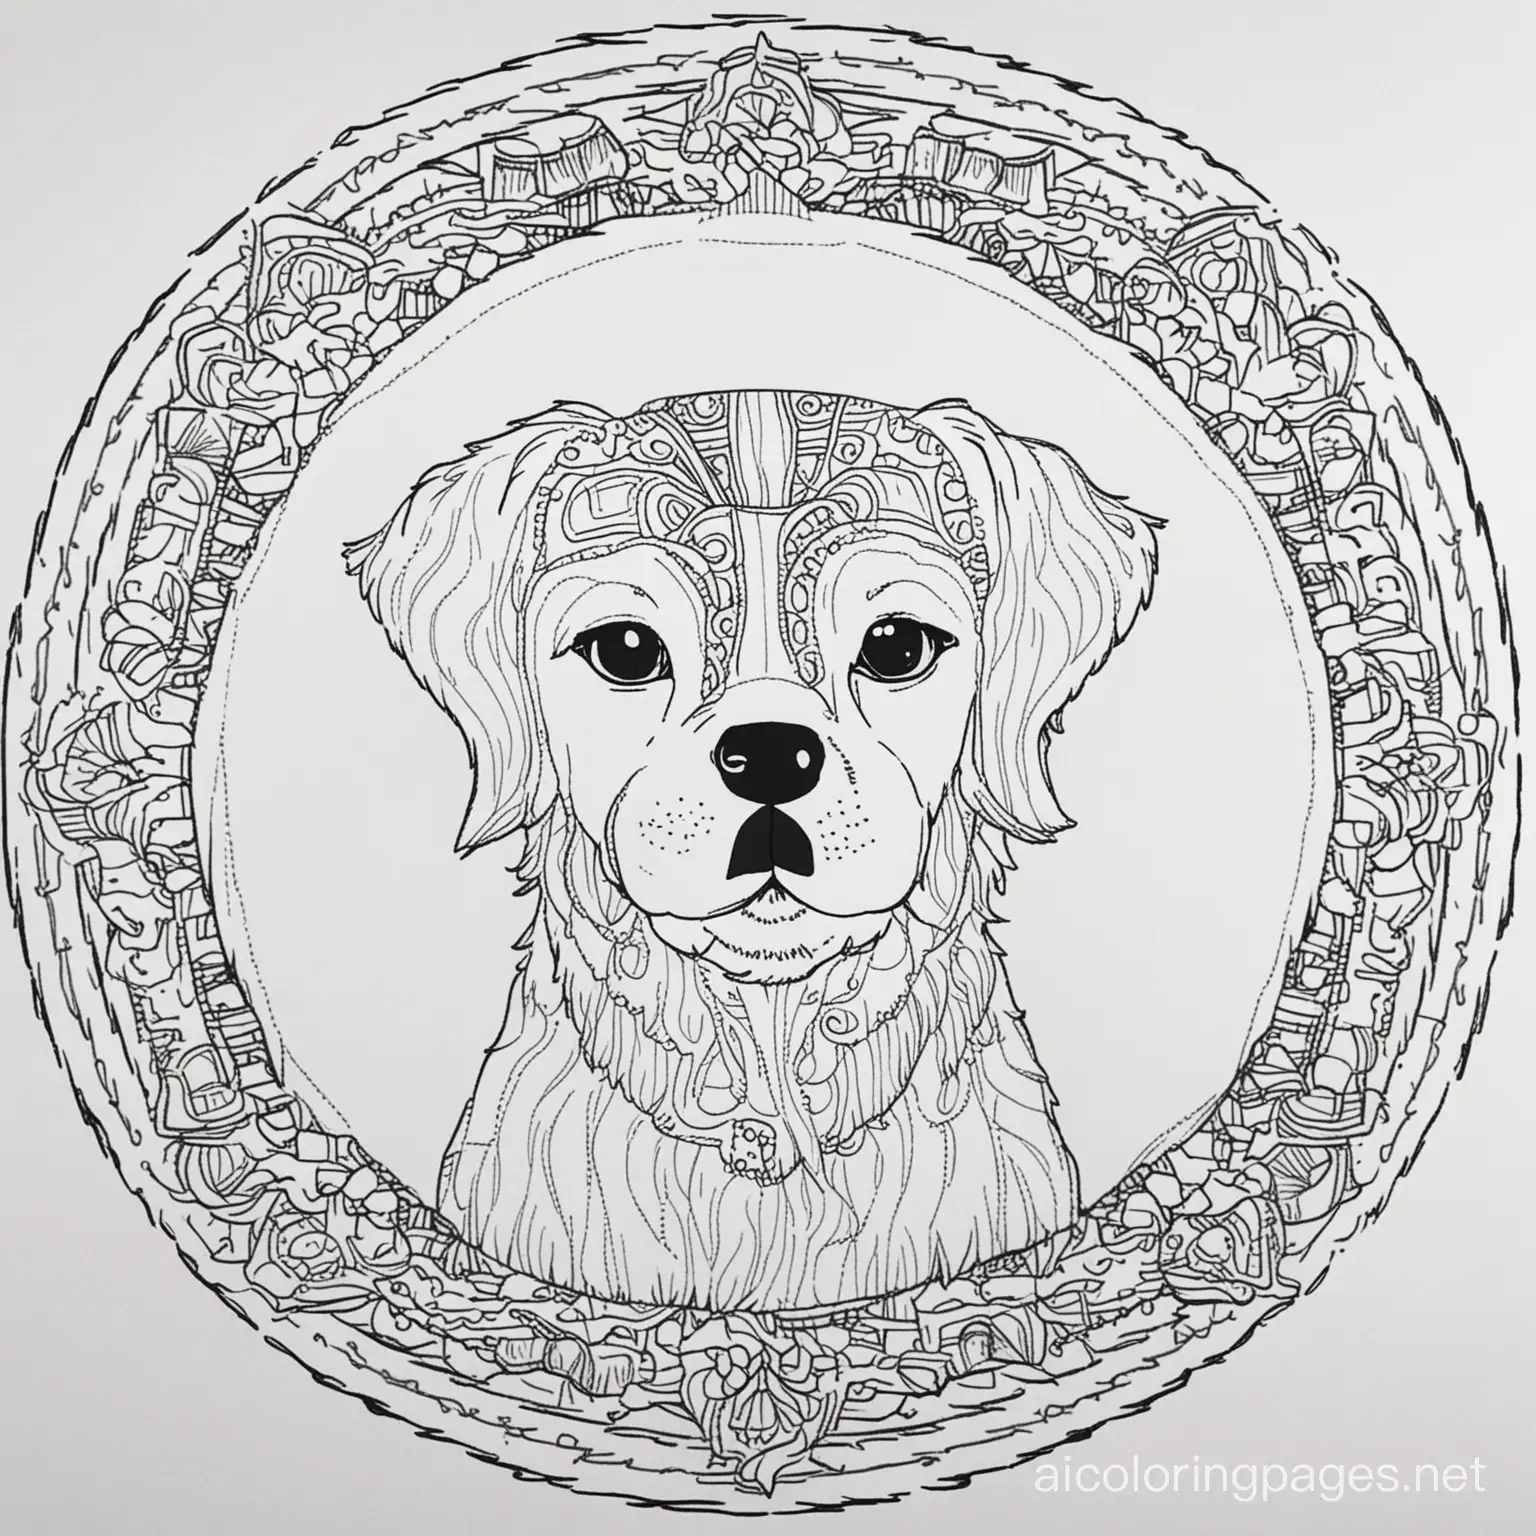 Dog-Mandalas-Coloring-Page-Black-and-White-Line-Art-for-Simplicity-and-Ease-of-Coloring